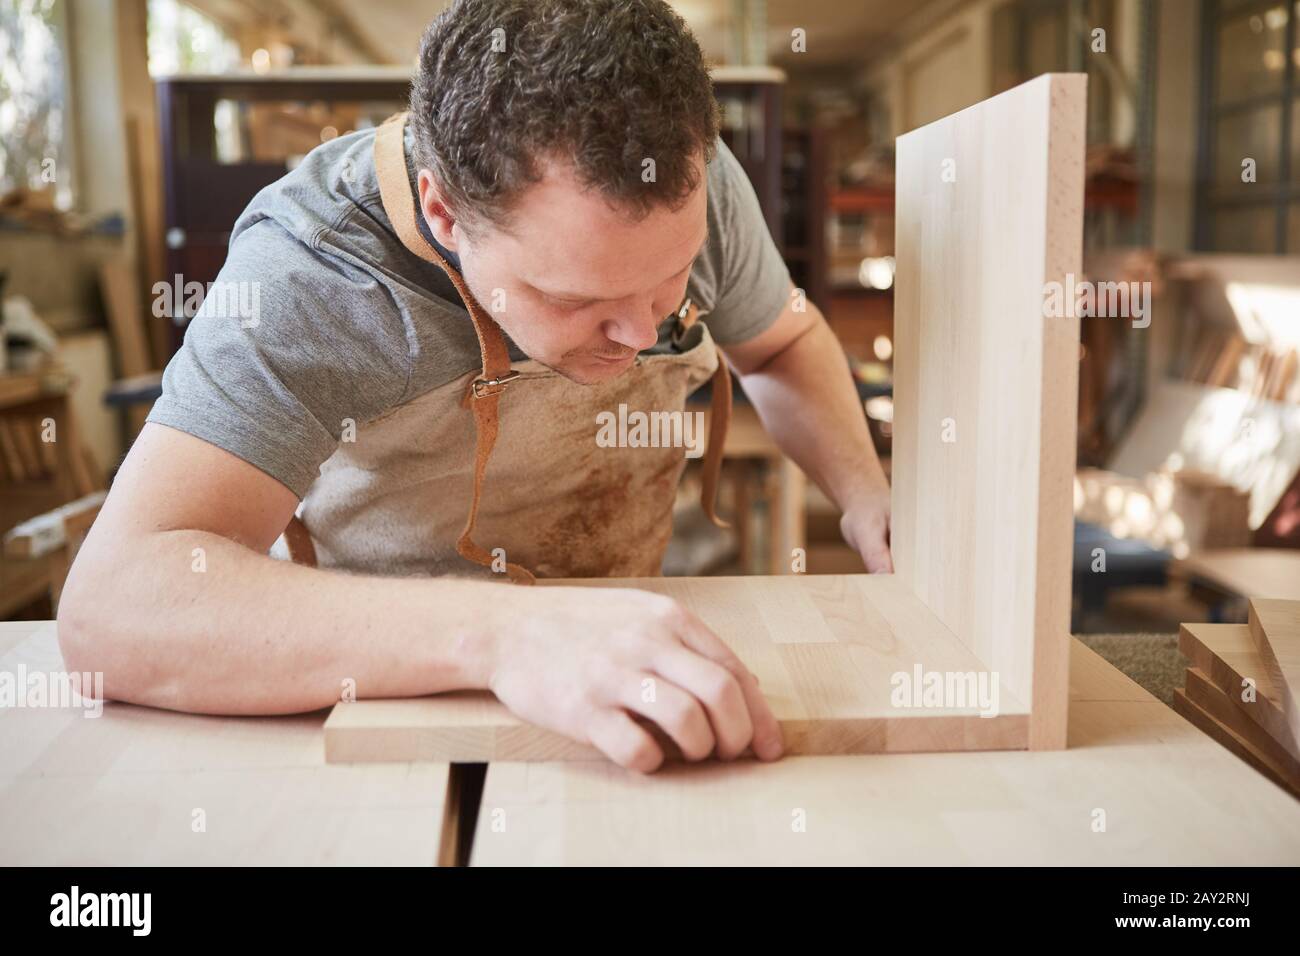 Furniture maker in training in a joinery builds a shelf from wood Stock Photo